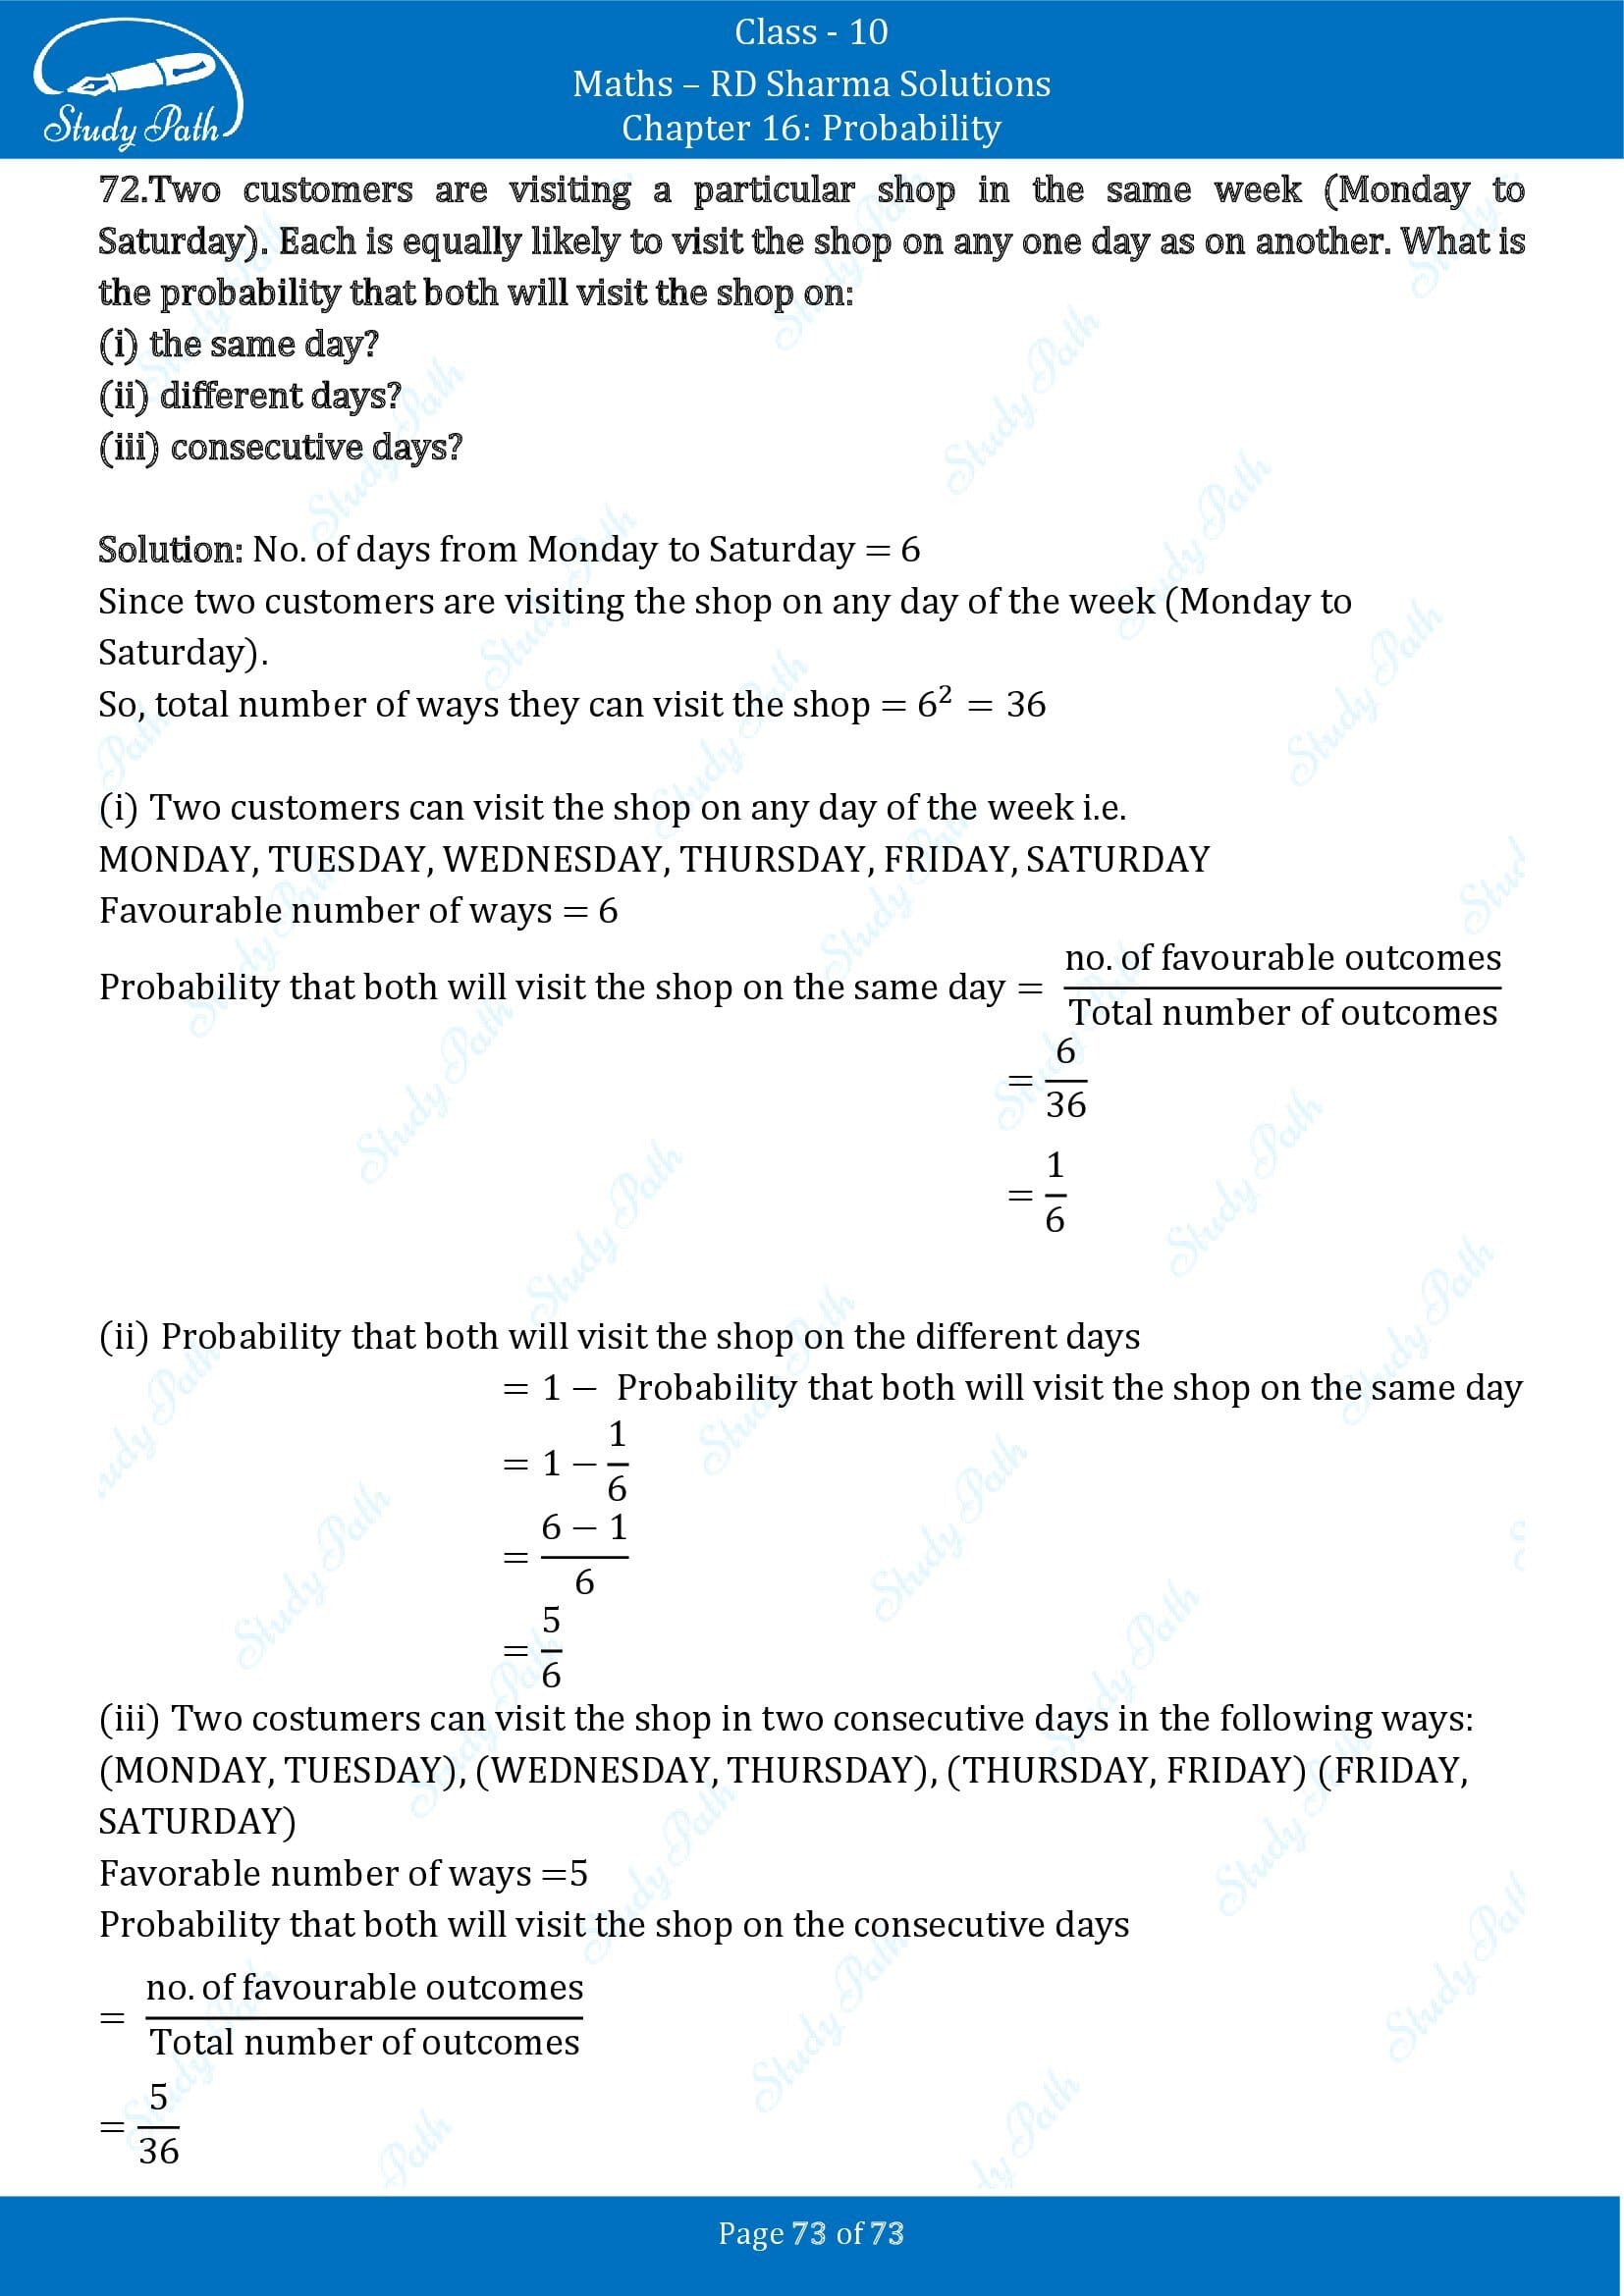 RD Sharma Solutions Class 10 Chapter 16 Probability Exercise 16.1 00073